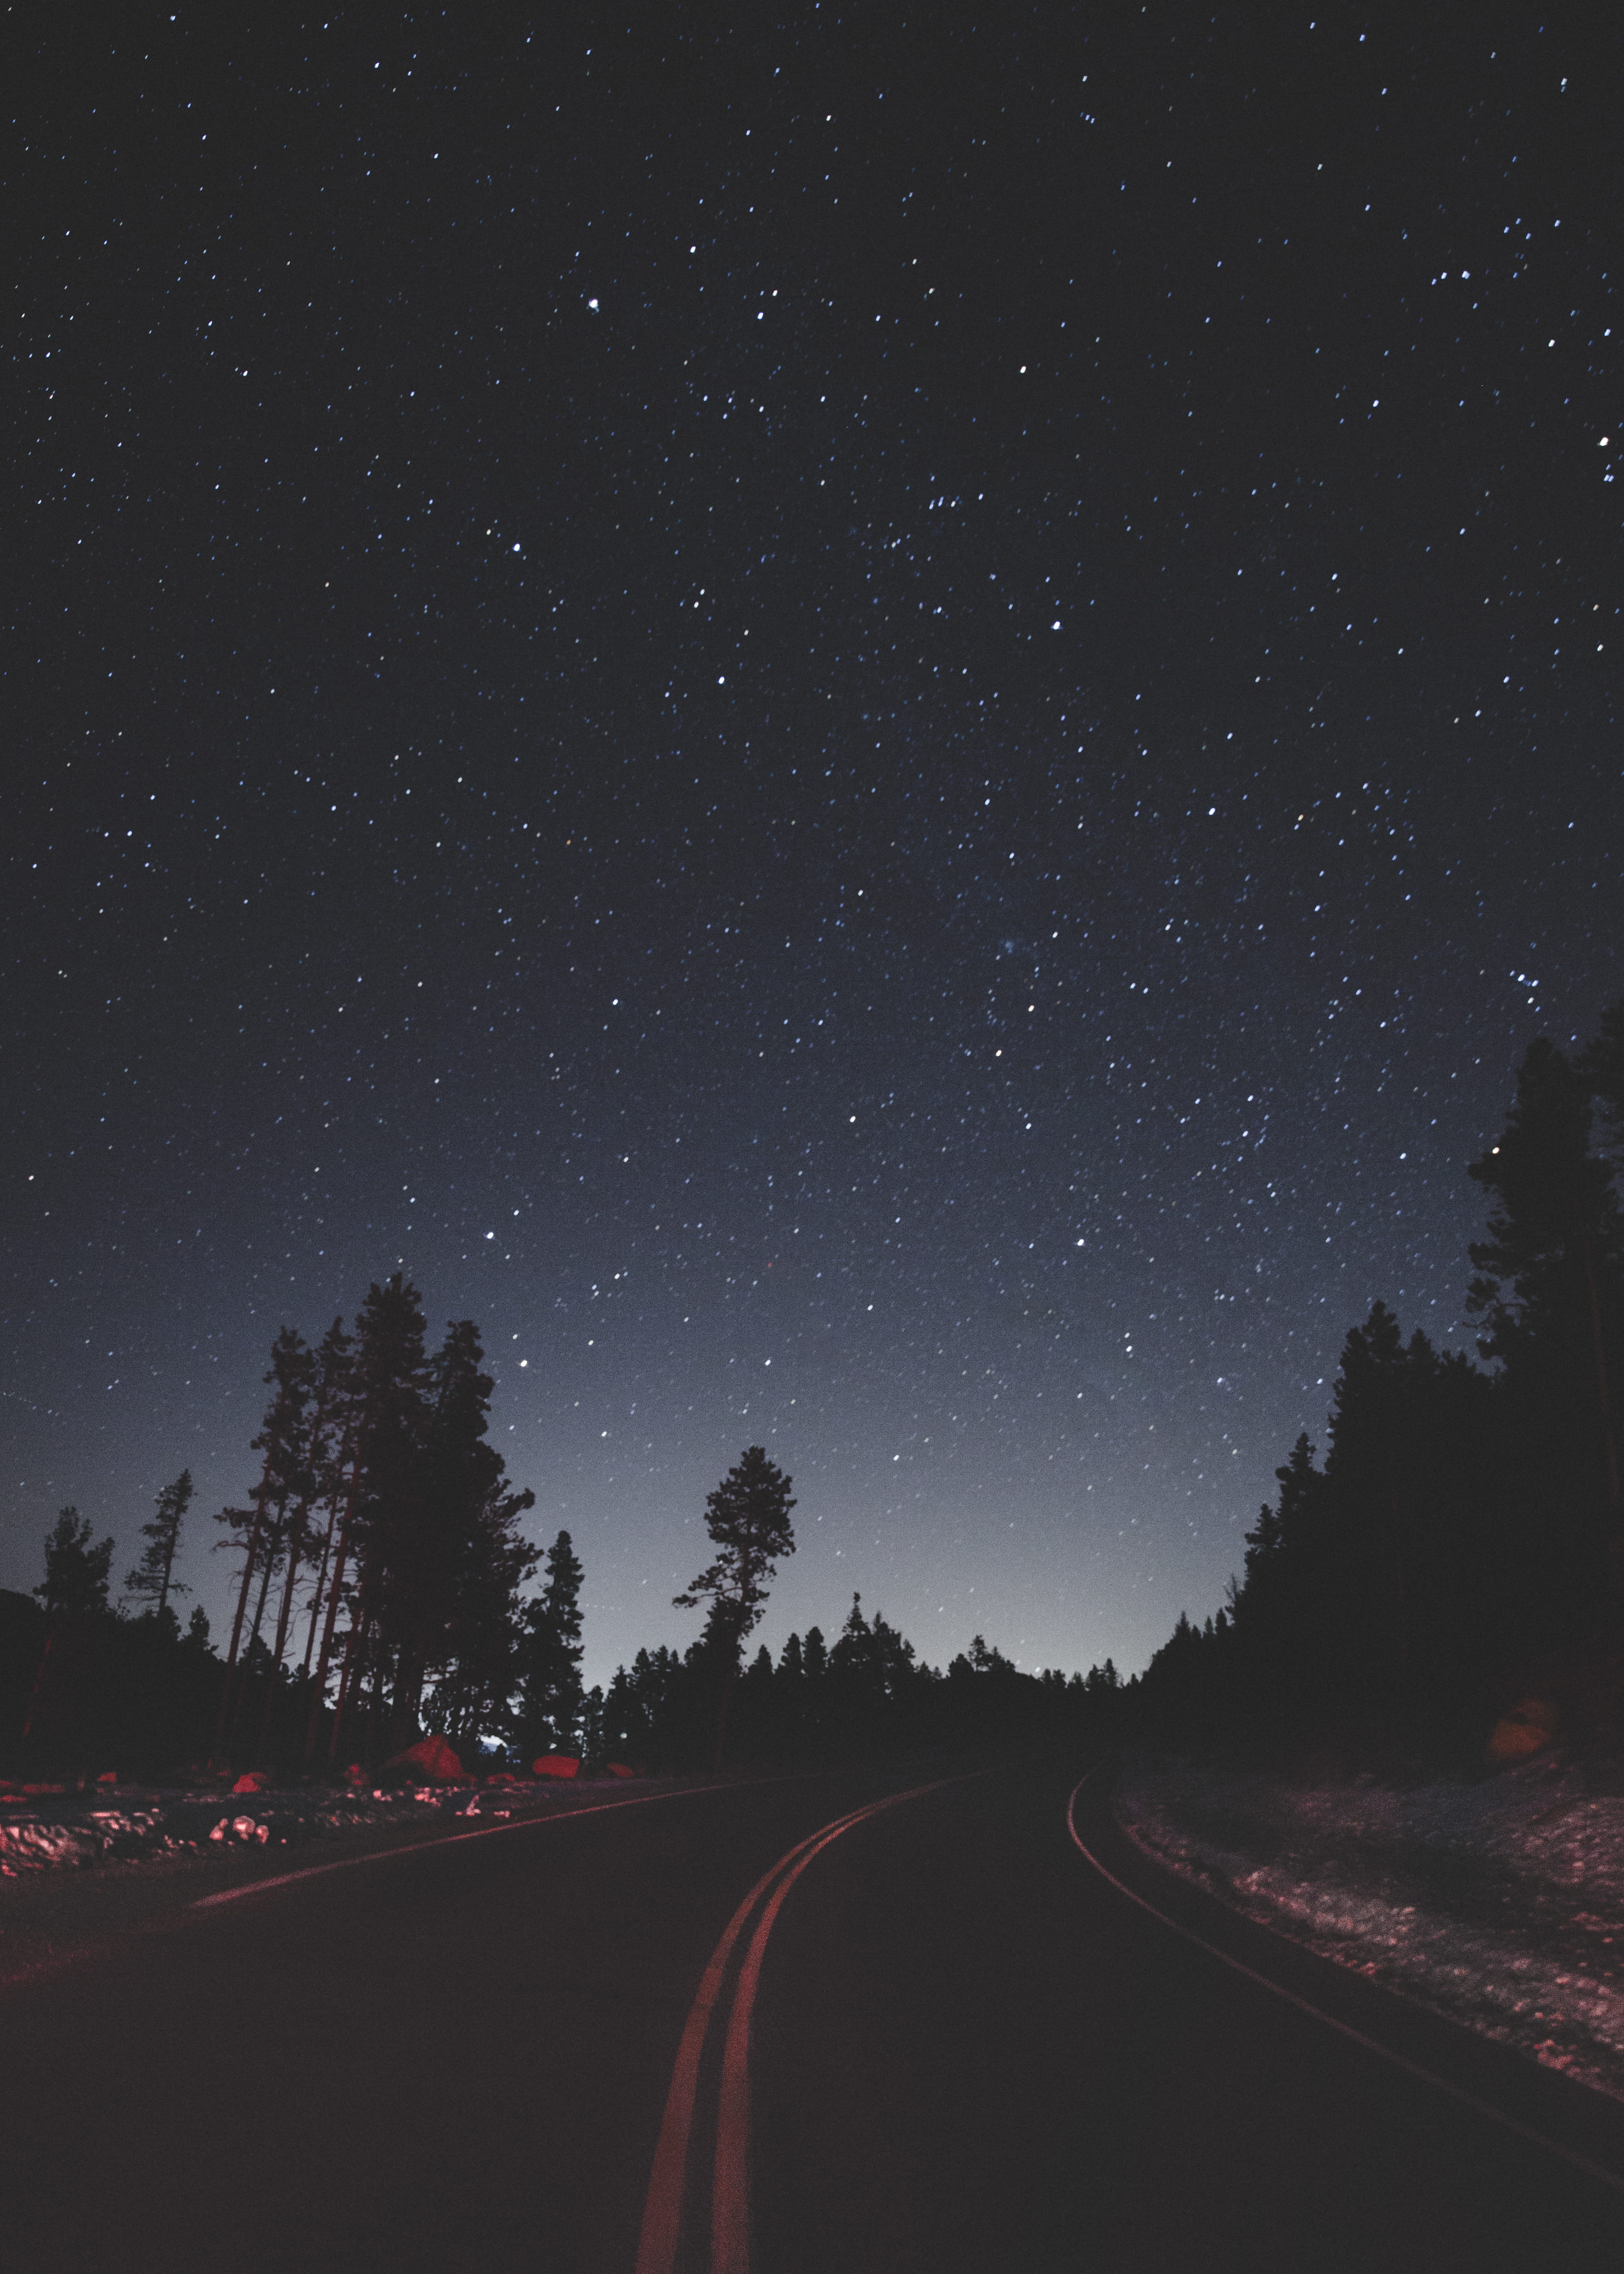 Looking Up, empty road between trees under sky with stars, night